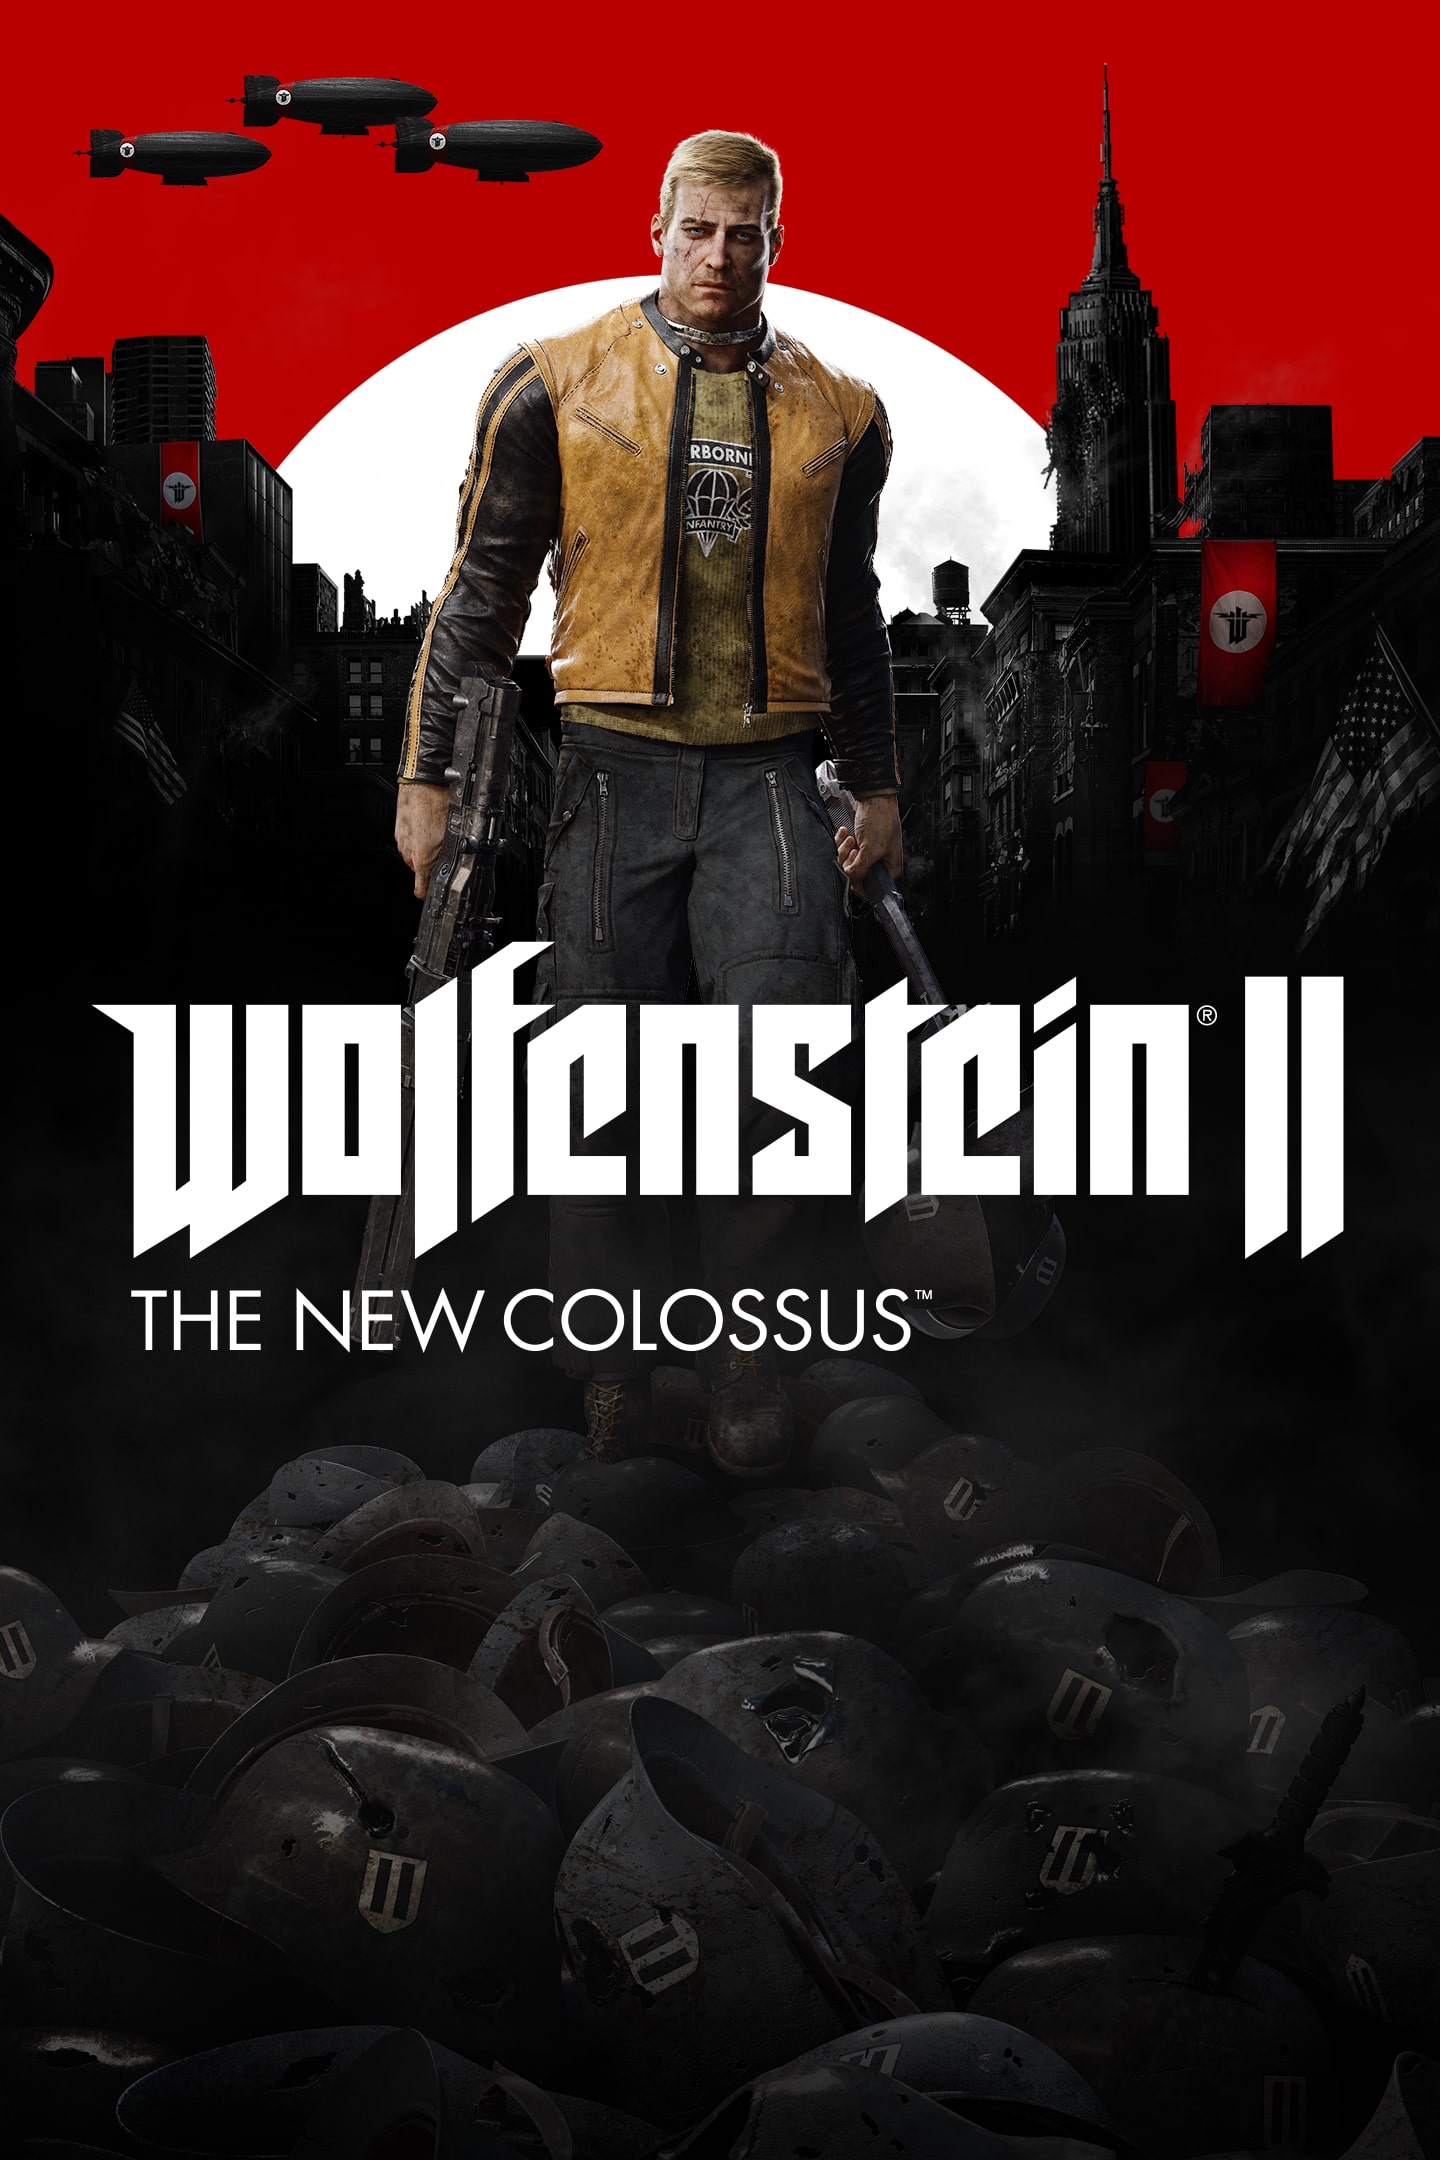 Dangle underordnet Pearly Wolfenstein® II: The New Colossus™